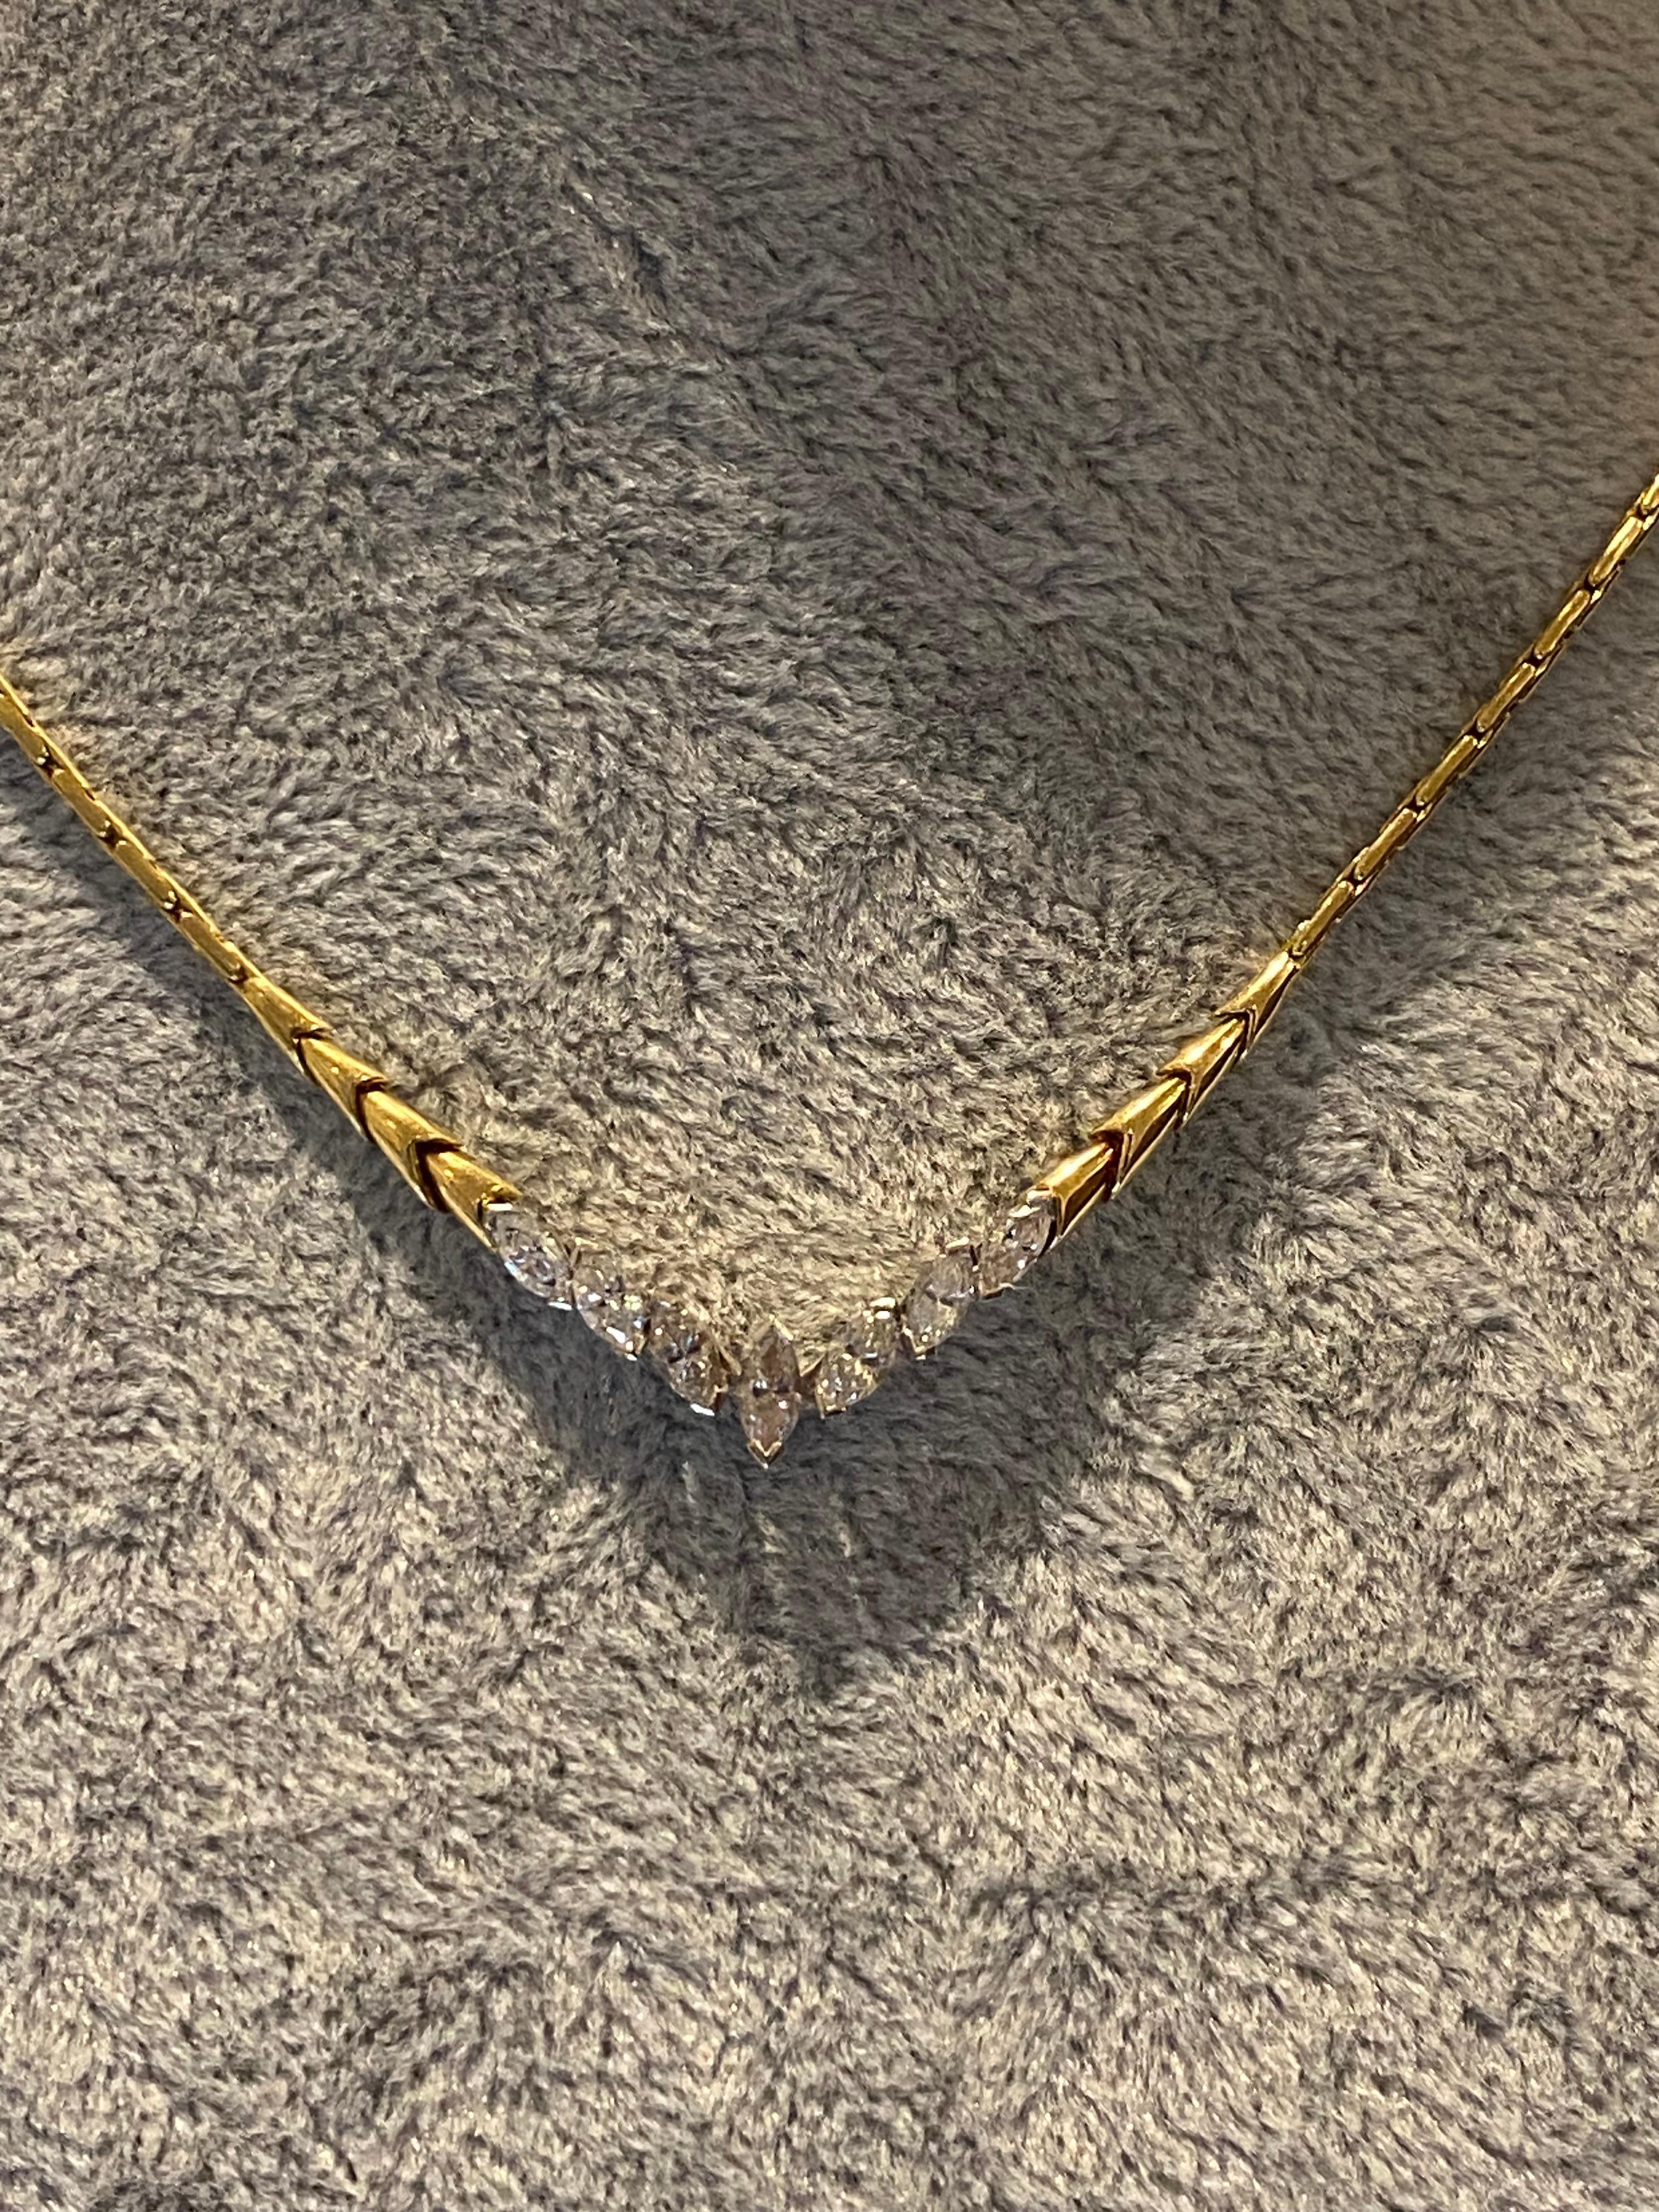 Visually-striking 18K yellow & white gold necklet 
of choker size 
featuring an elegant V-shaped drop, 
approx. 2.5cm long
Adorned with 7 natural sparkling diamonds
of desirable marquise shape 
(with the centre measuring 7mm x 2.5mm approx.)
of